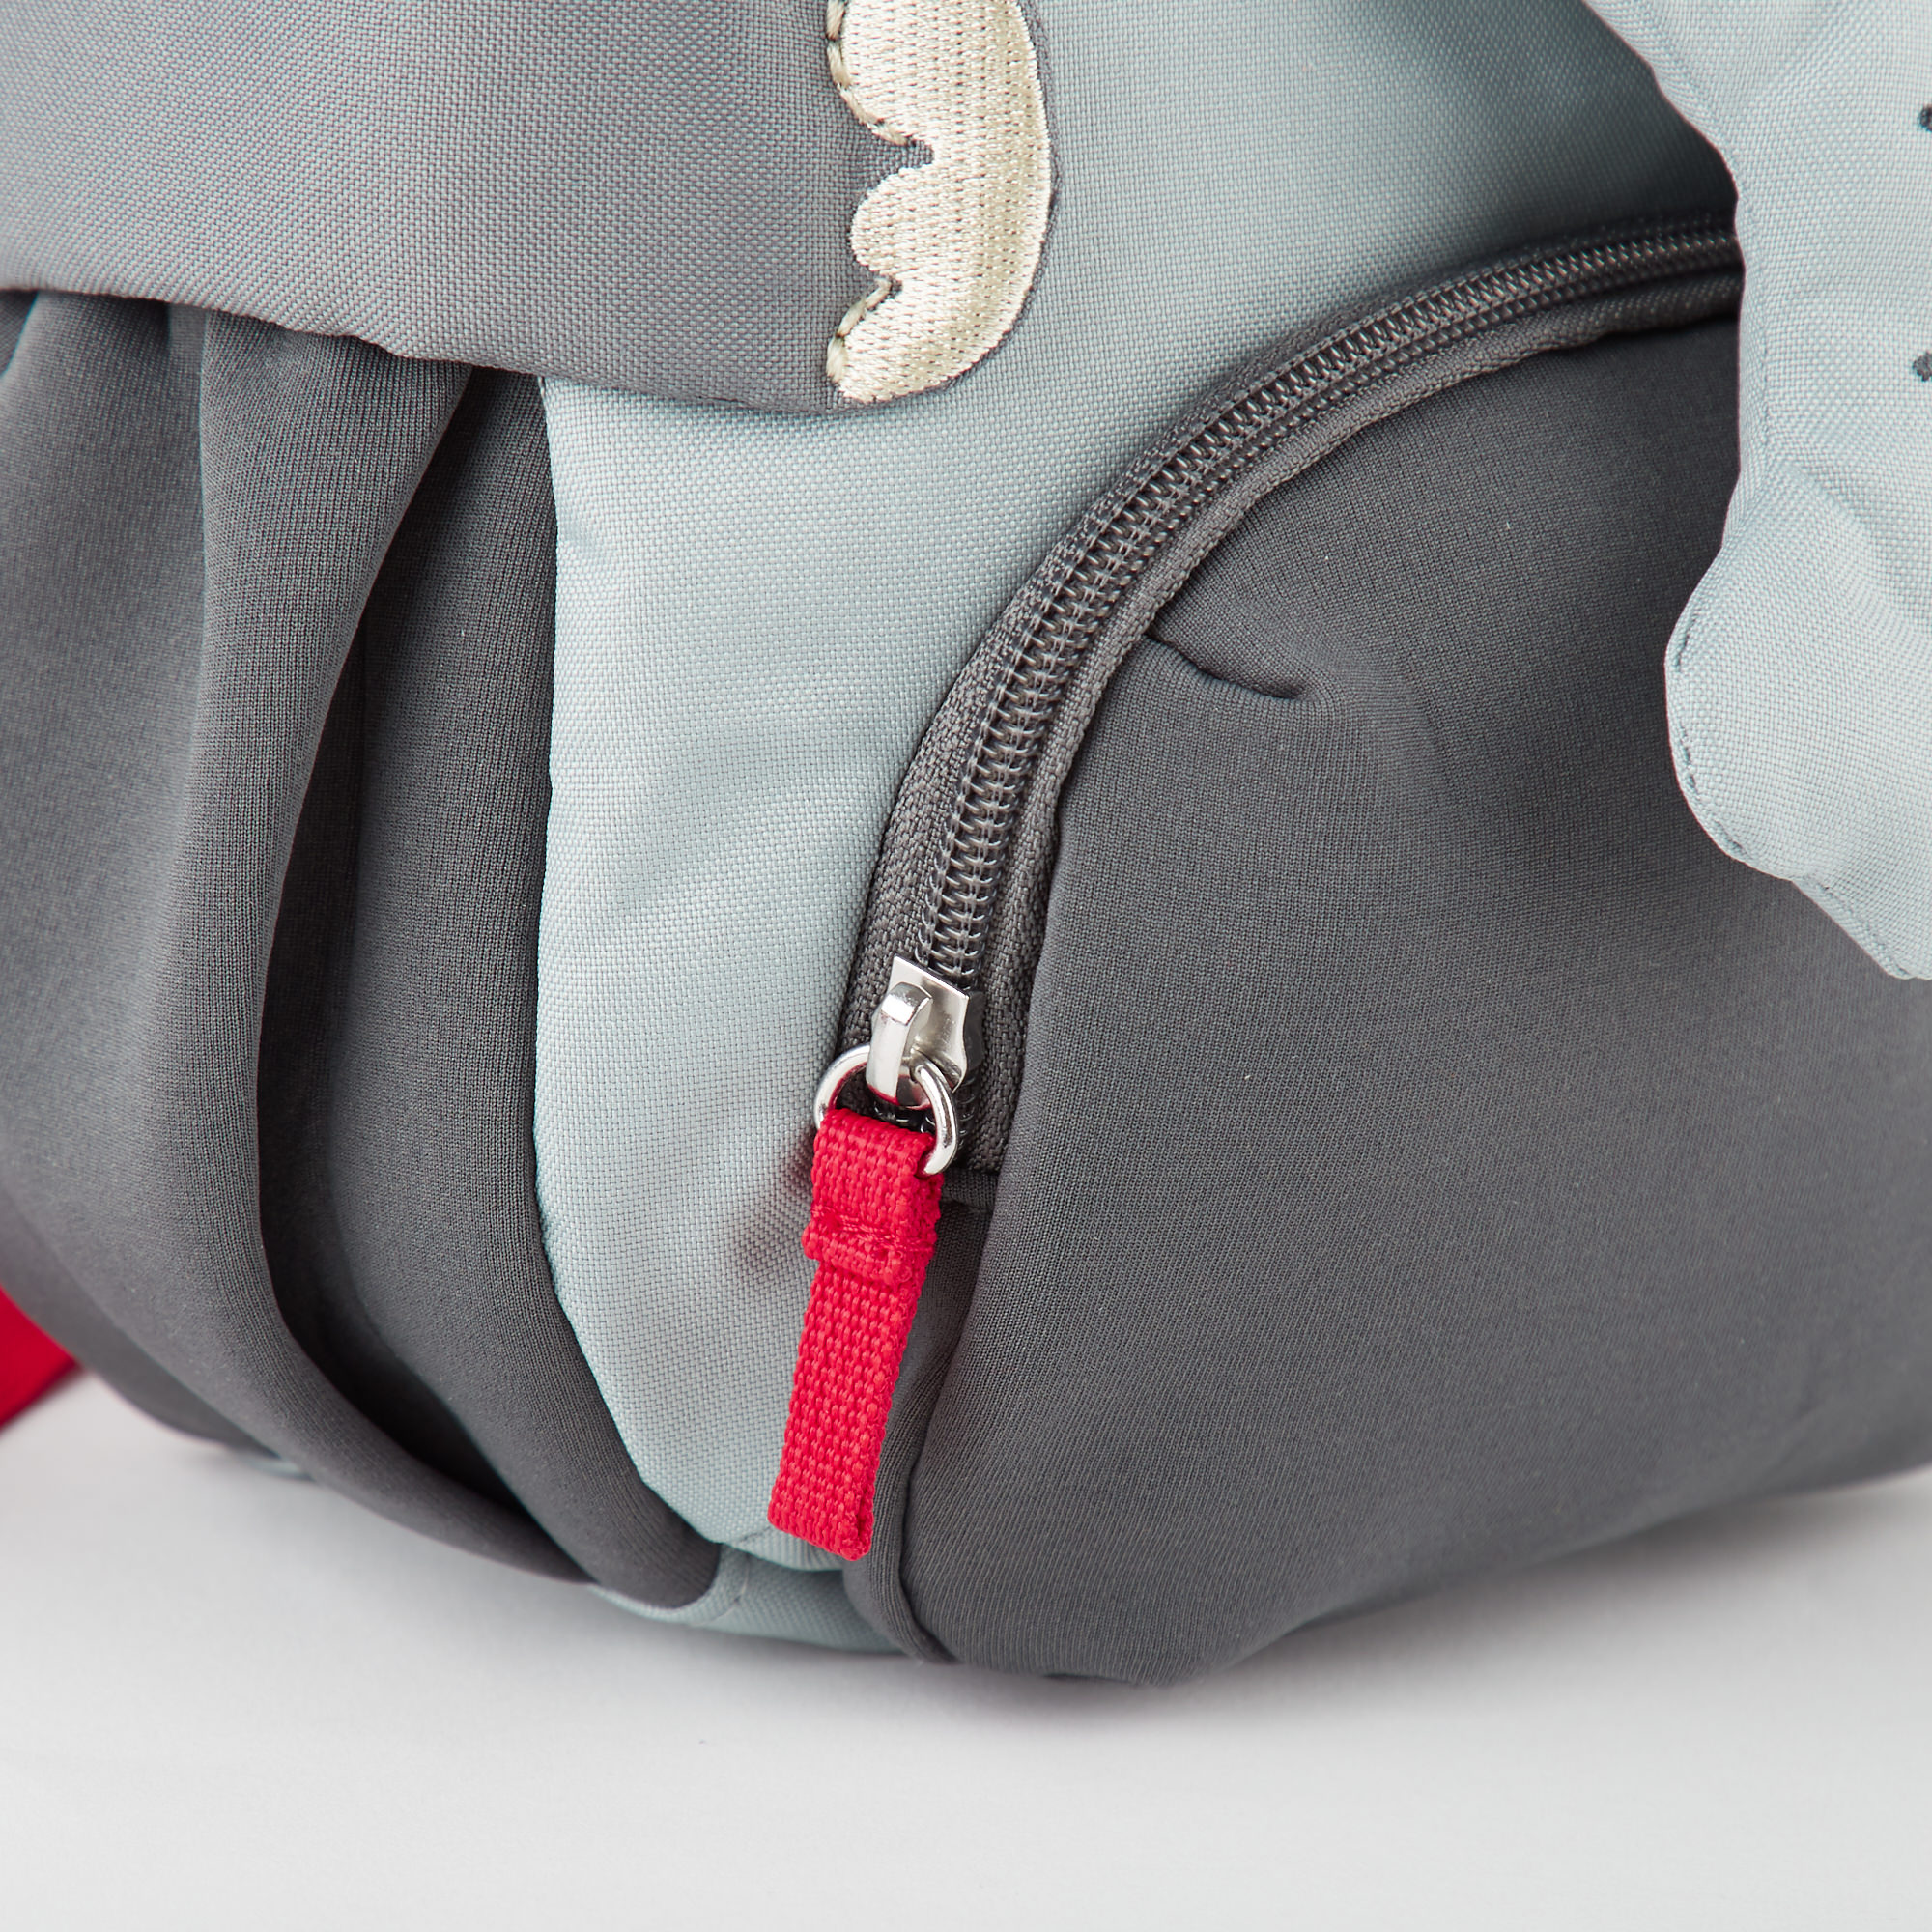 Kindergarden backpack elephant with paws